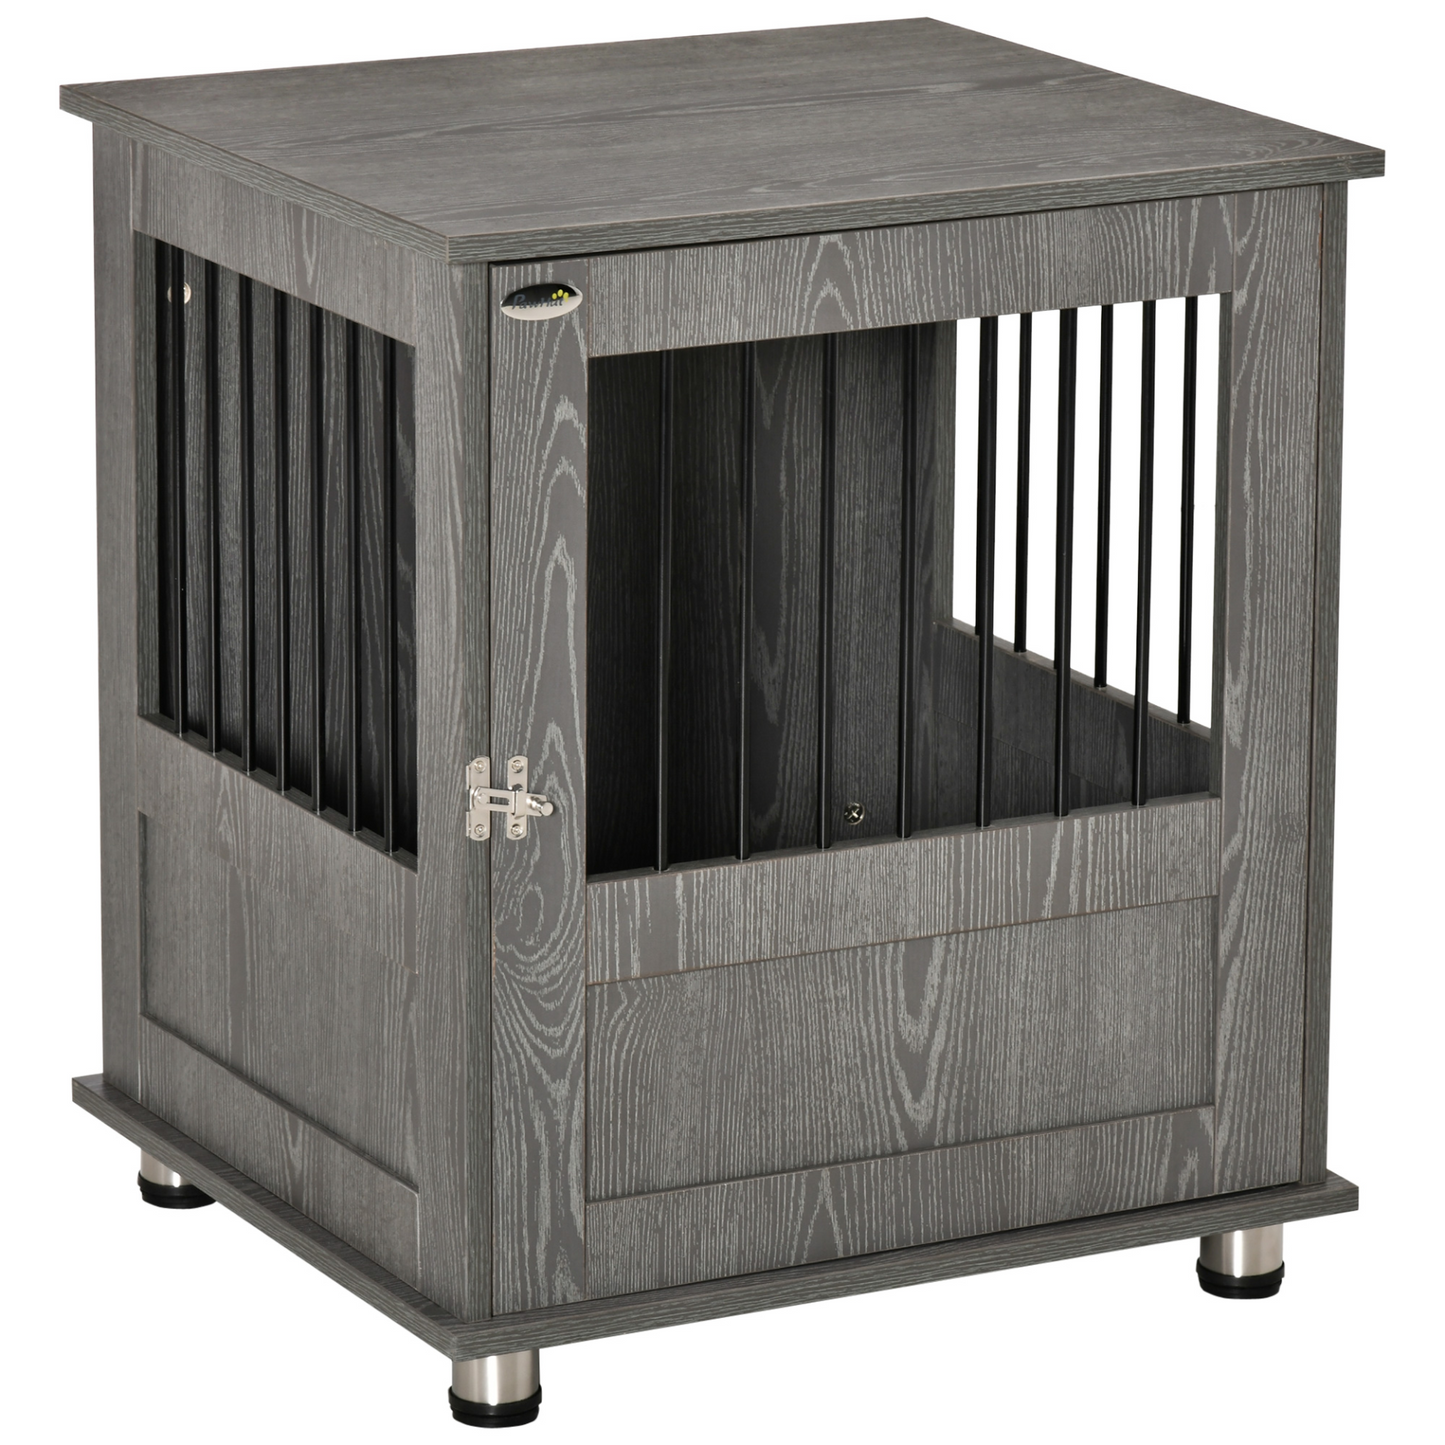 PawHut Dog Crate Furniture End Table, Pet Kennel for Small and Medium Dogs with Magnetic Door Indoor Animal Cage, Grey, 60 x 55 x 70 cm